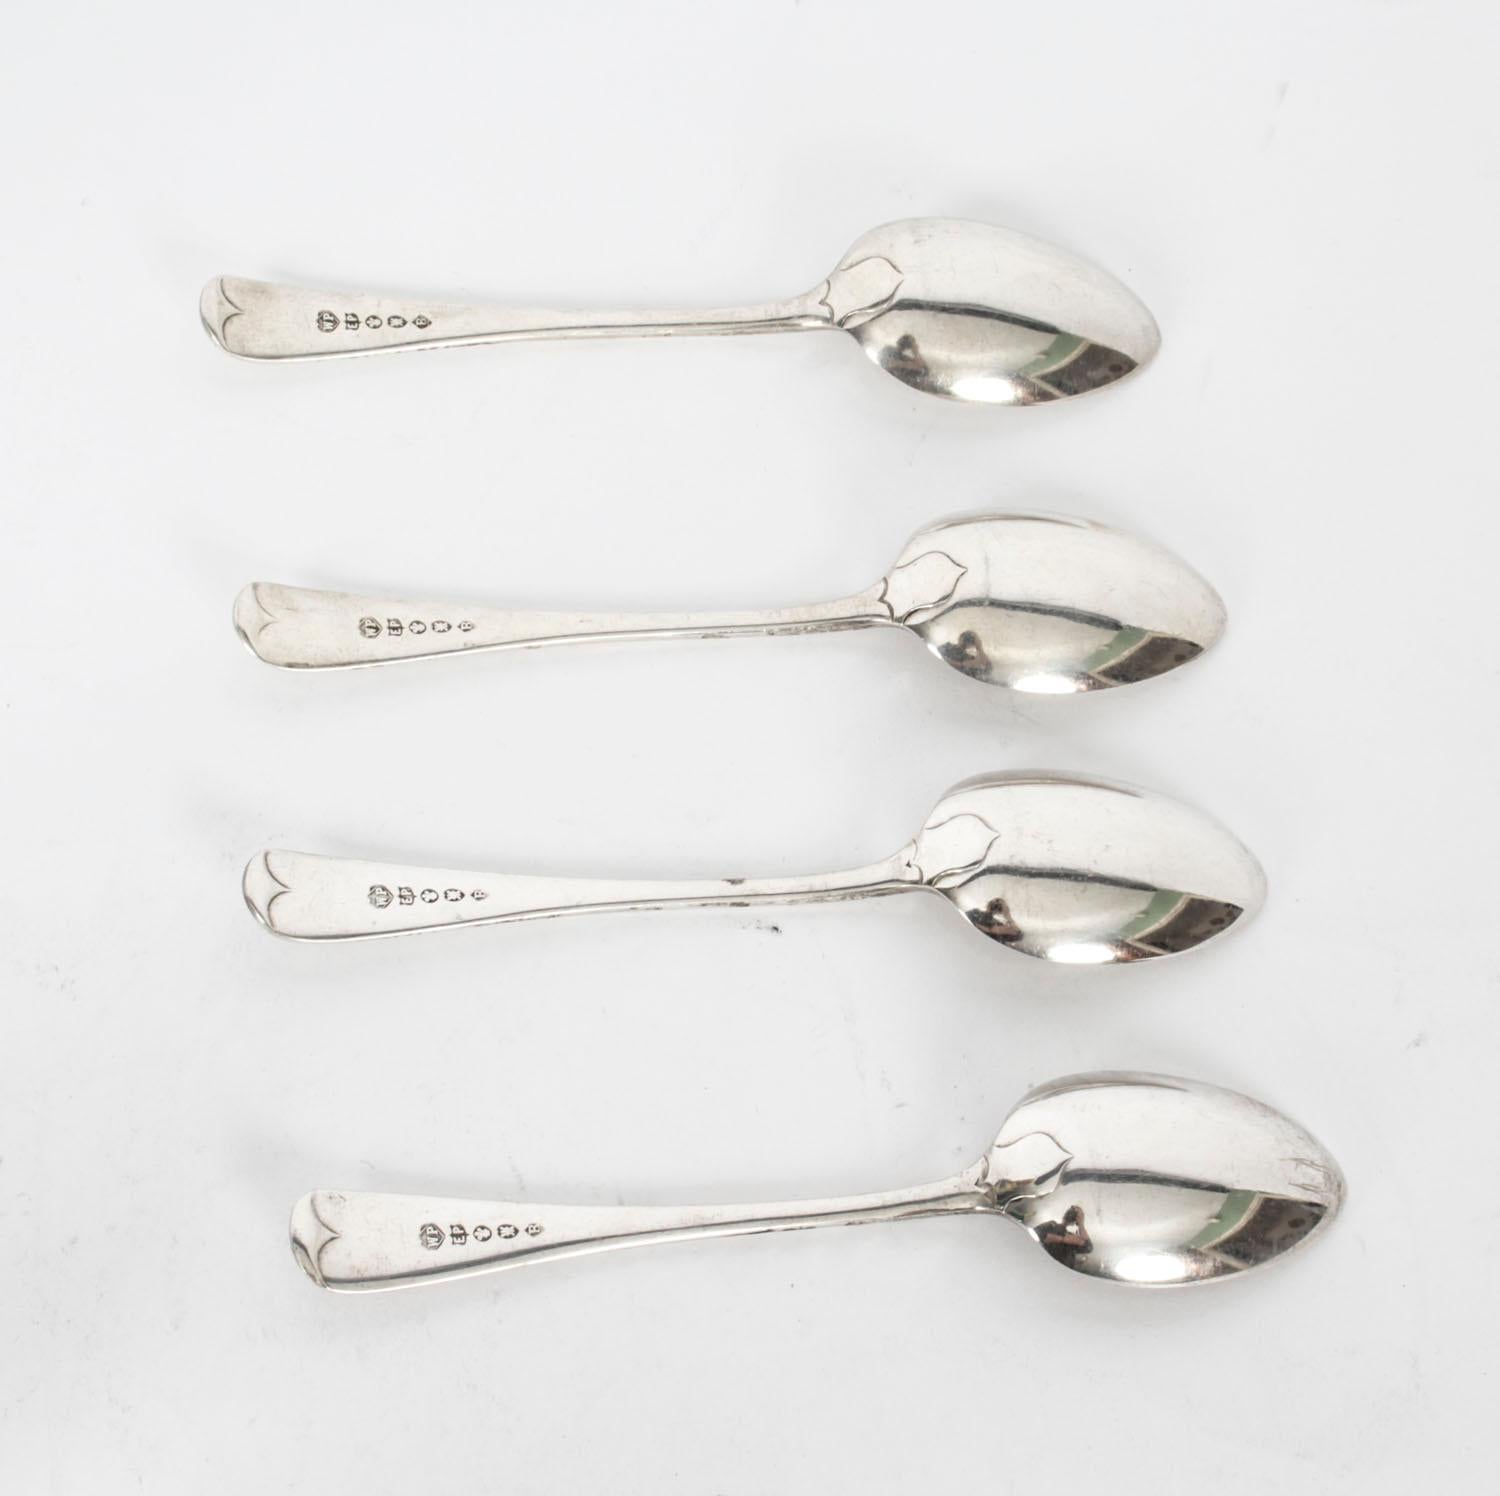 Antique Silver Plated Egg Cruet with Spoons, 19th Century 3